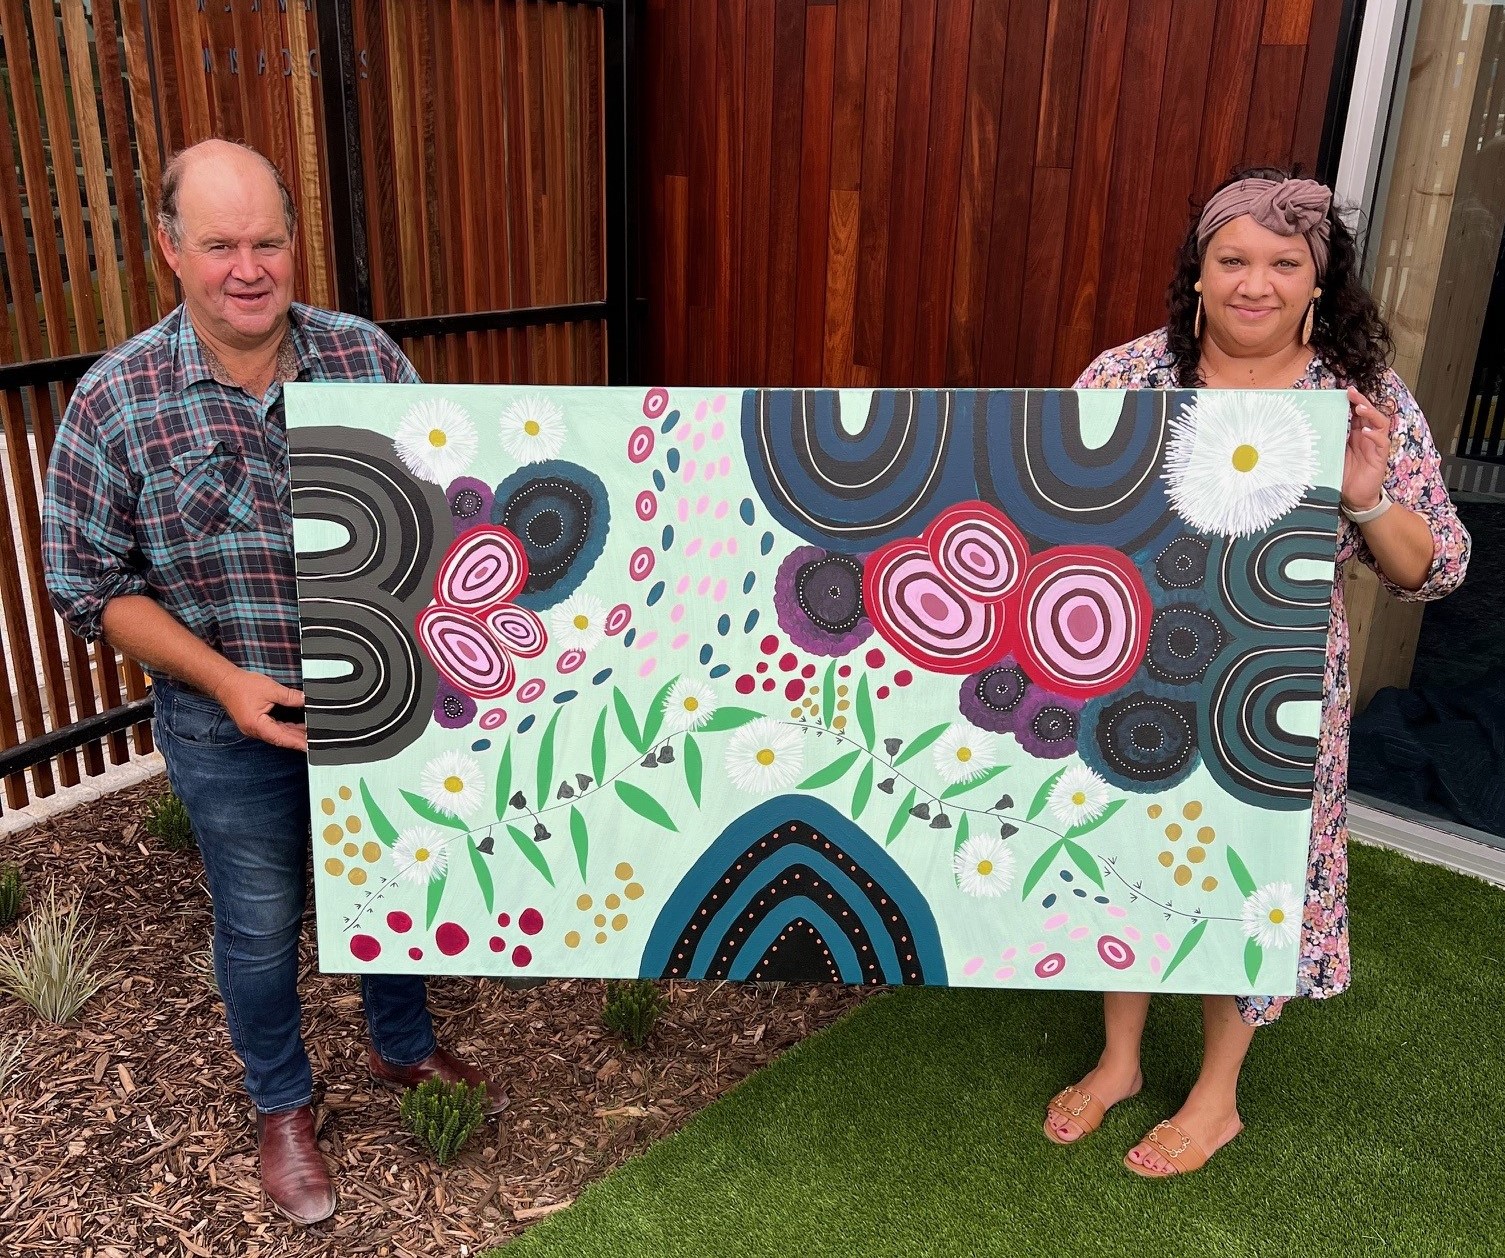 Shire celebrates Indigenous art with mural in new building